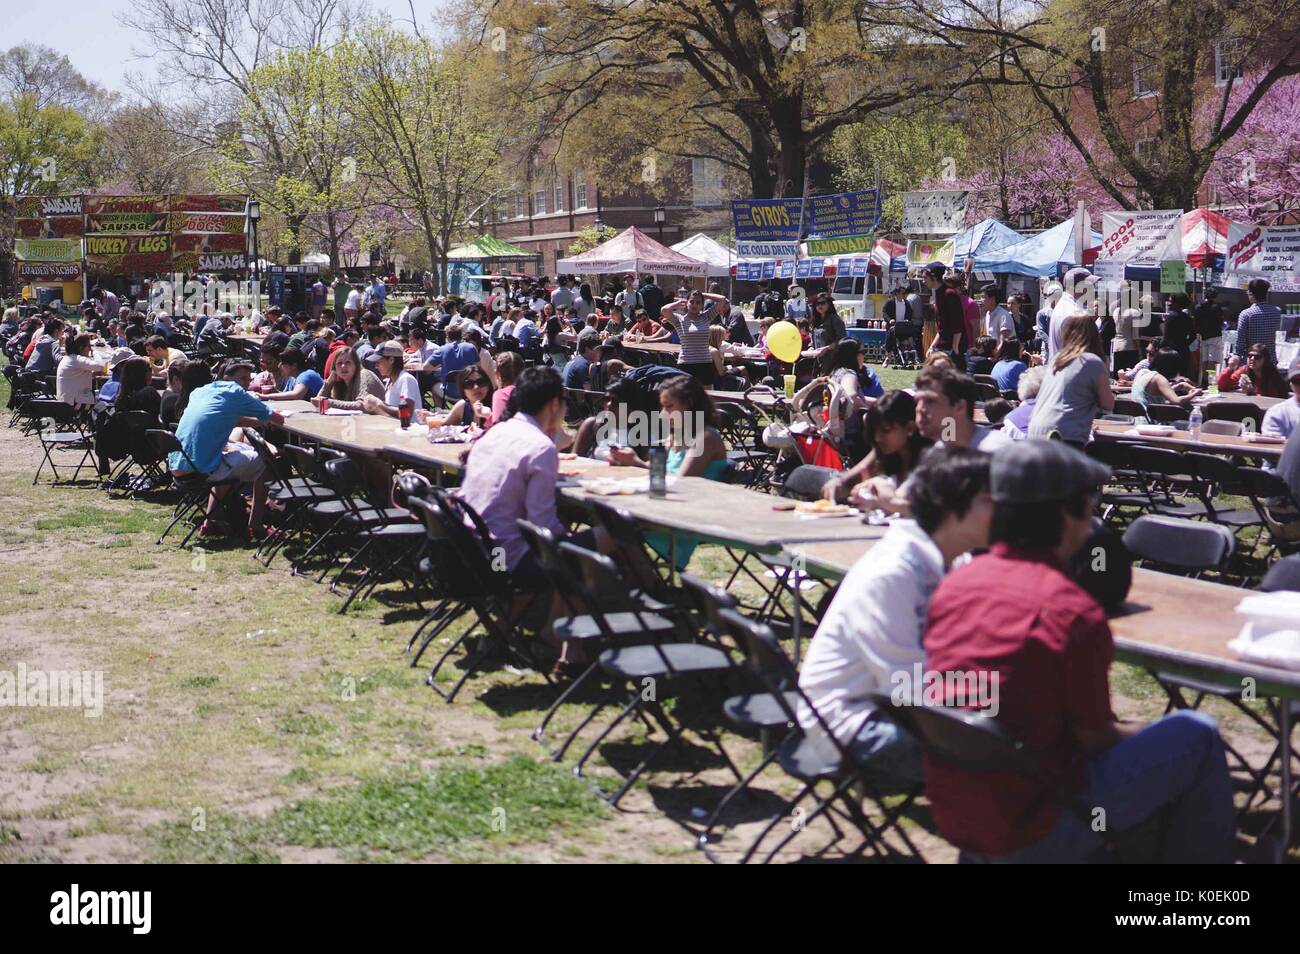 College students and members of the Johns Hopkins and Baltimore communities sit at tables, eating and socializing as food stands surround them, during Spring Fair, an annual festival with music, food, shopping, and more that takes place every spring on the Homewood campus of the Johns Hopkins University in Baltimore, Maryland. 2014. Courtesy Eric Chen. Stock Photo